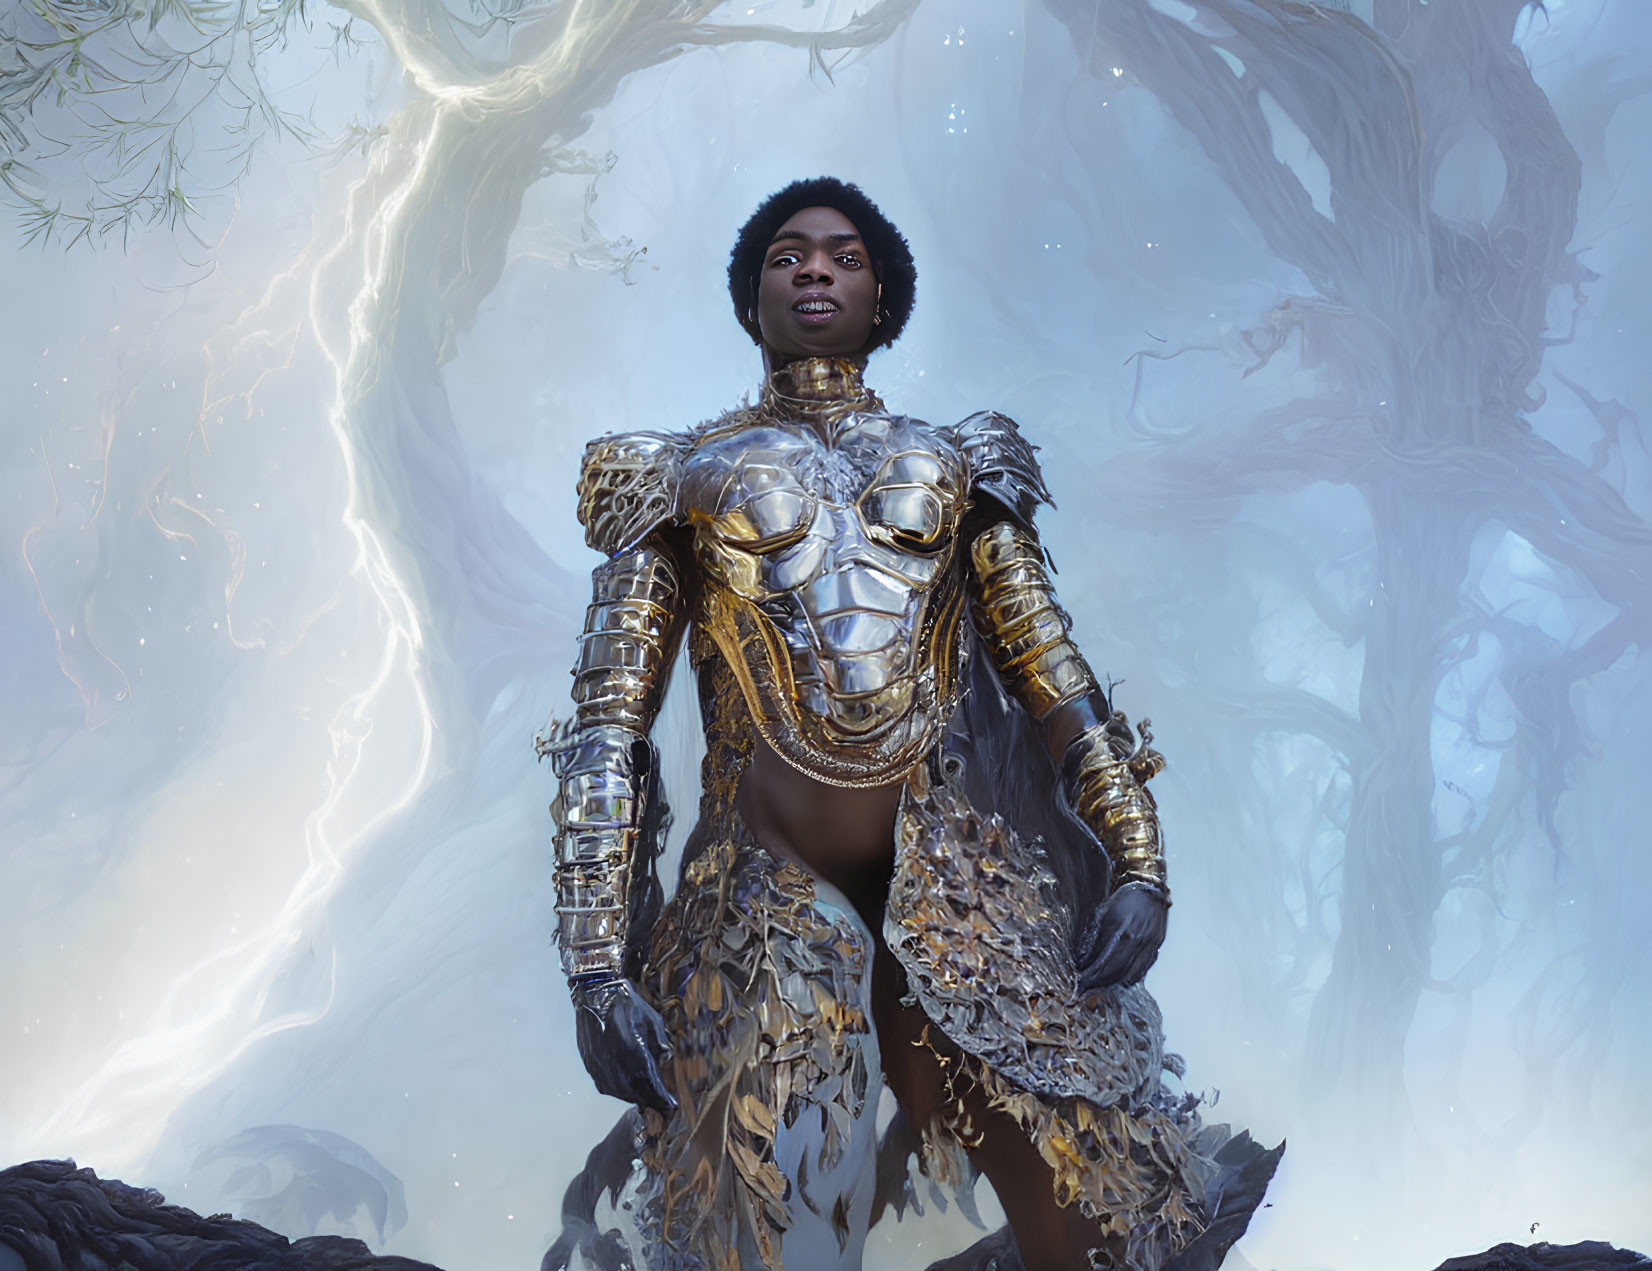 Golden-armored woman in mystical forest with twisted trees and shining light